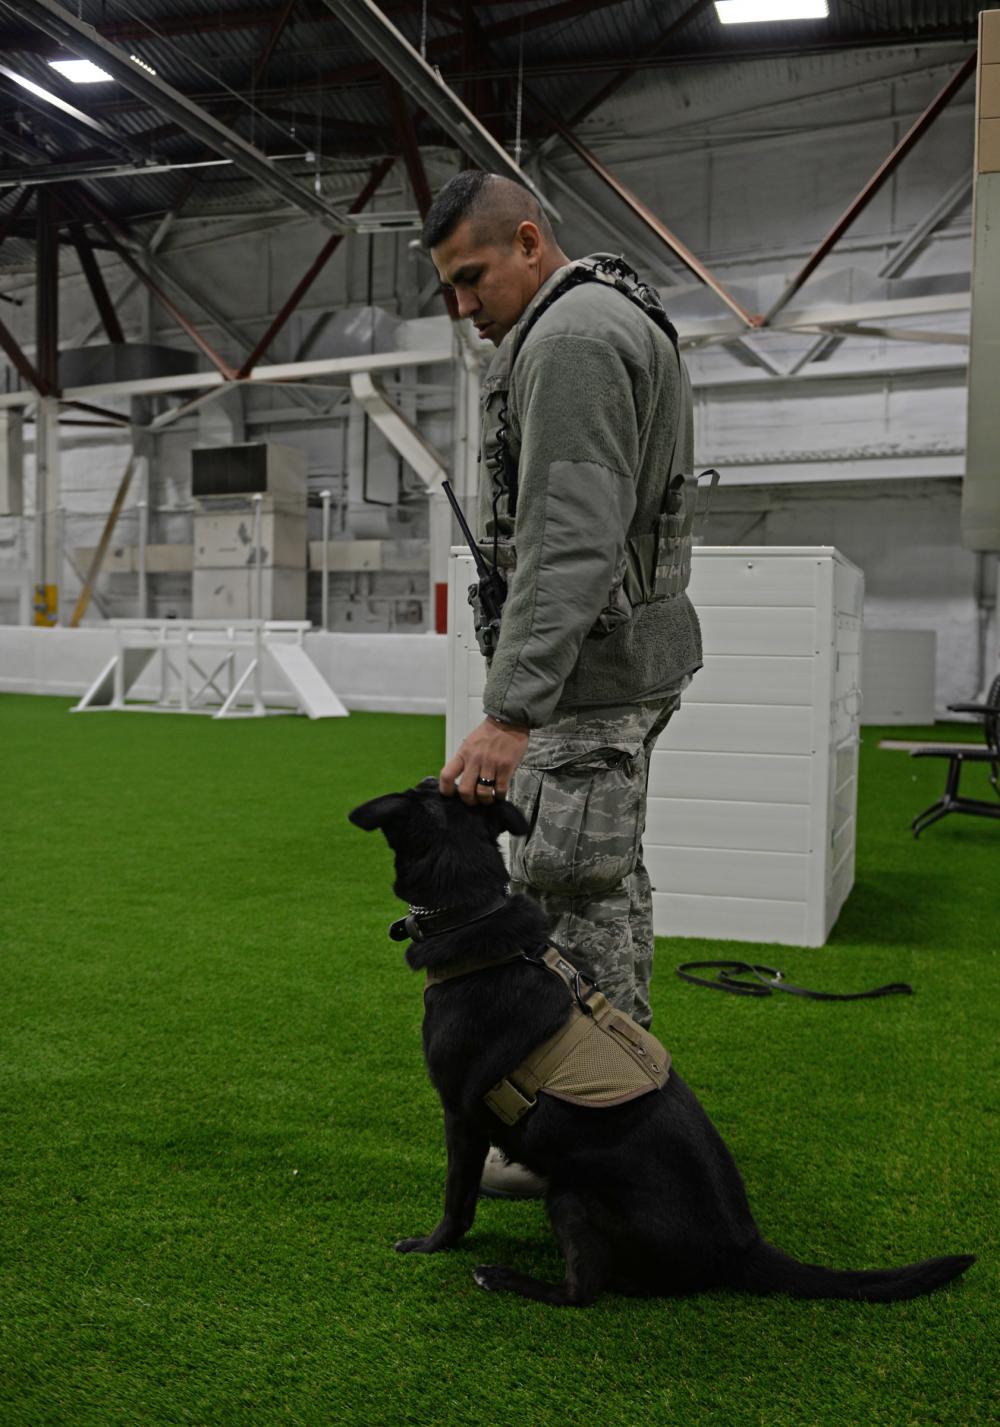 Mwd training course in houston